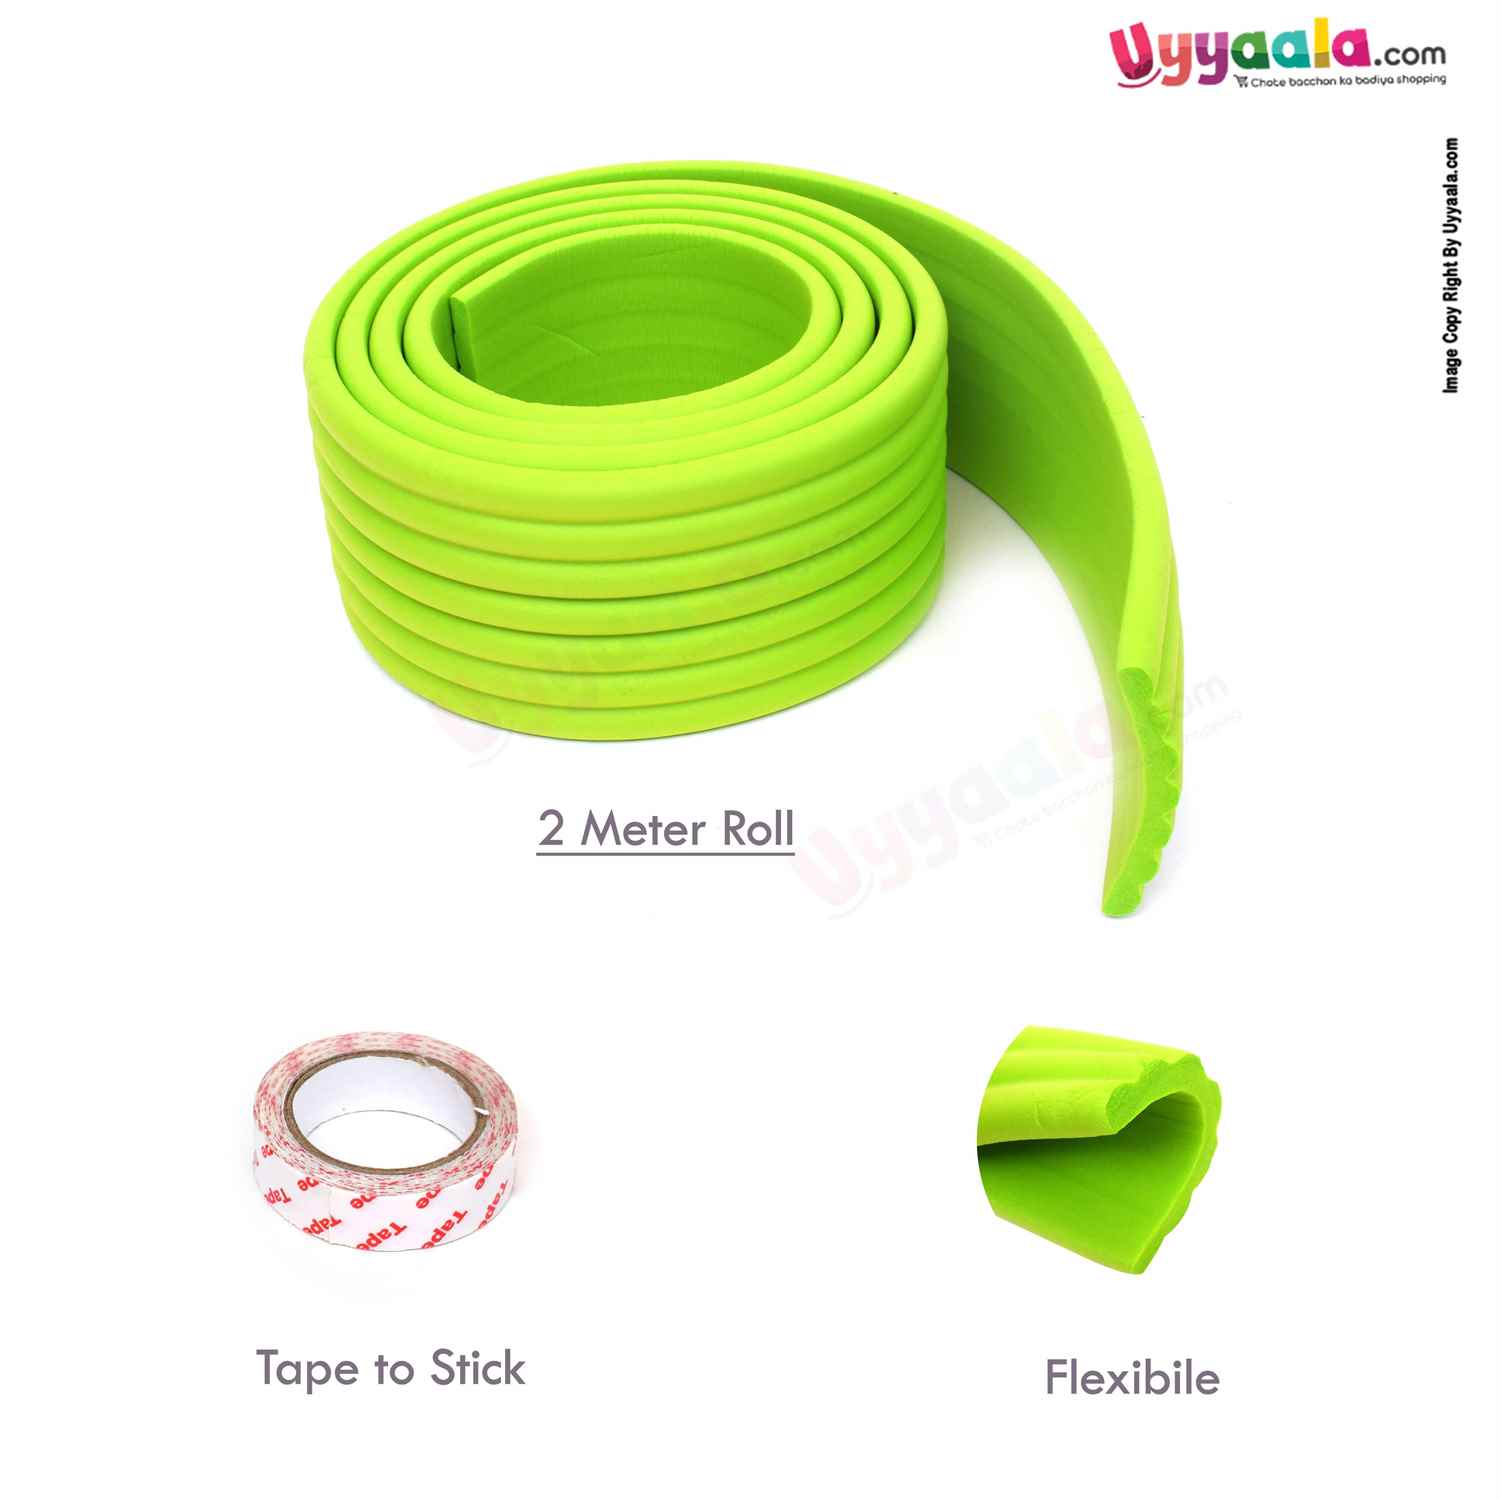 WEIKANG Safety Edge Guard for Babies 2 Meters 0+m Age, Green